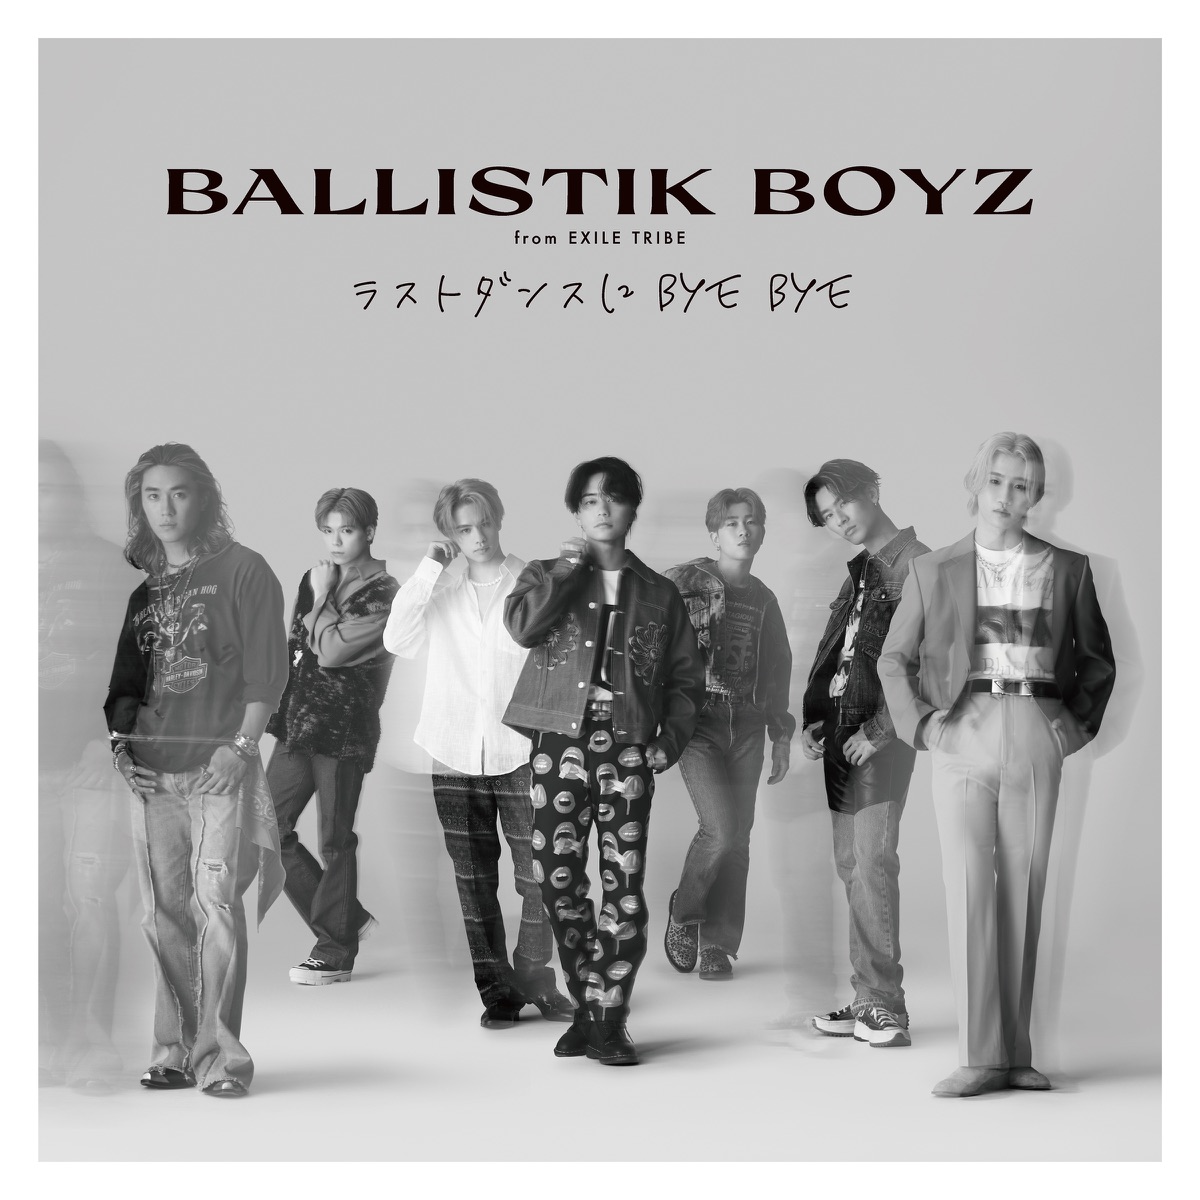 Cover art for『BALLISTIK BOYZ from EXILE TRIBE - Milk&Coffee』from the release『Last Dance ni BYE BYE